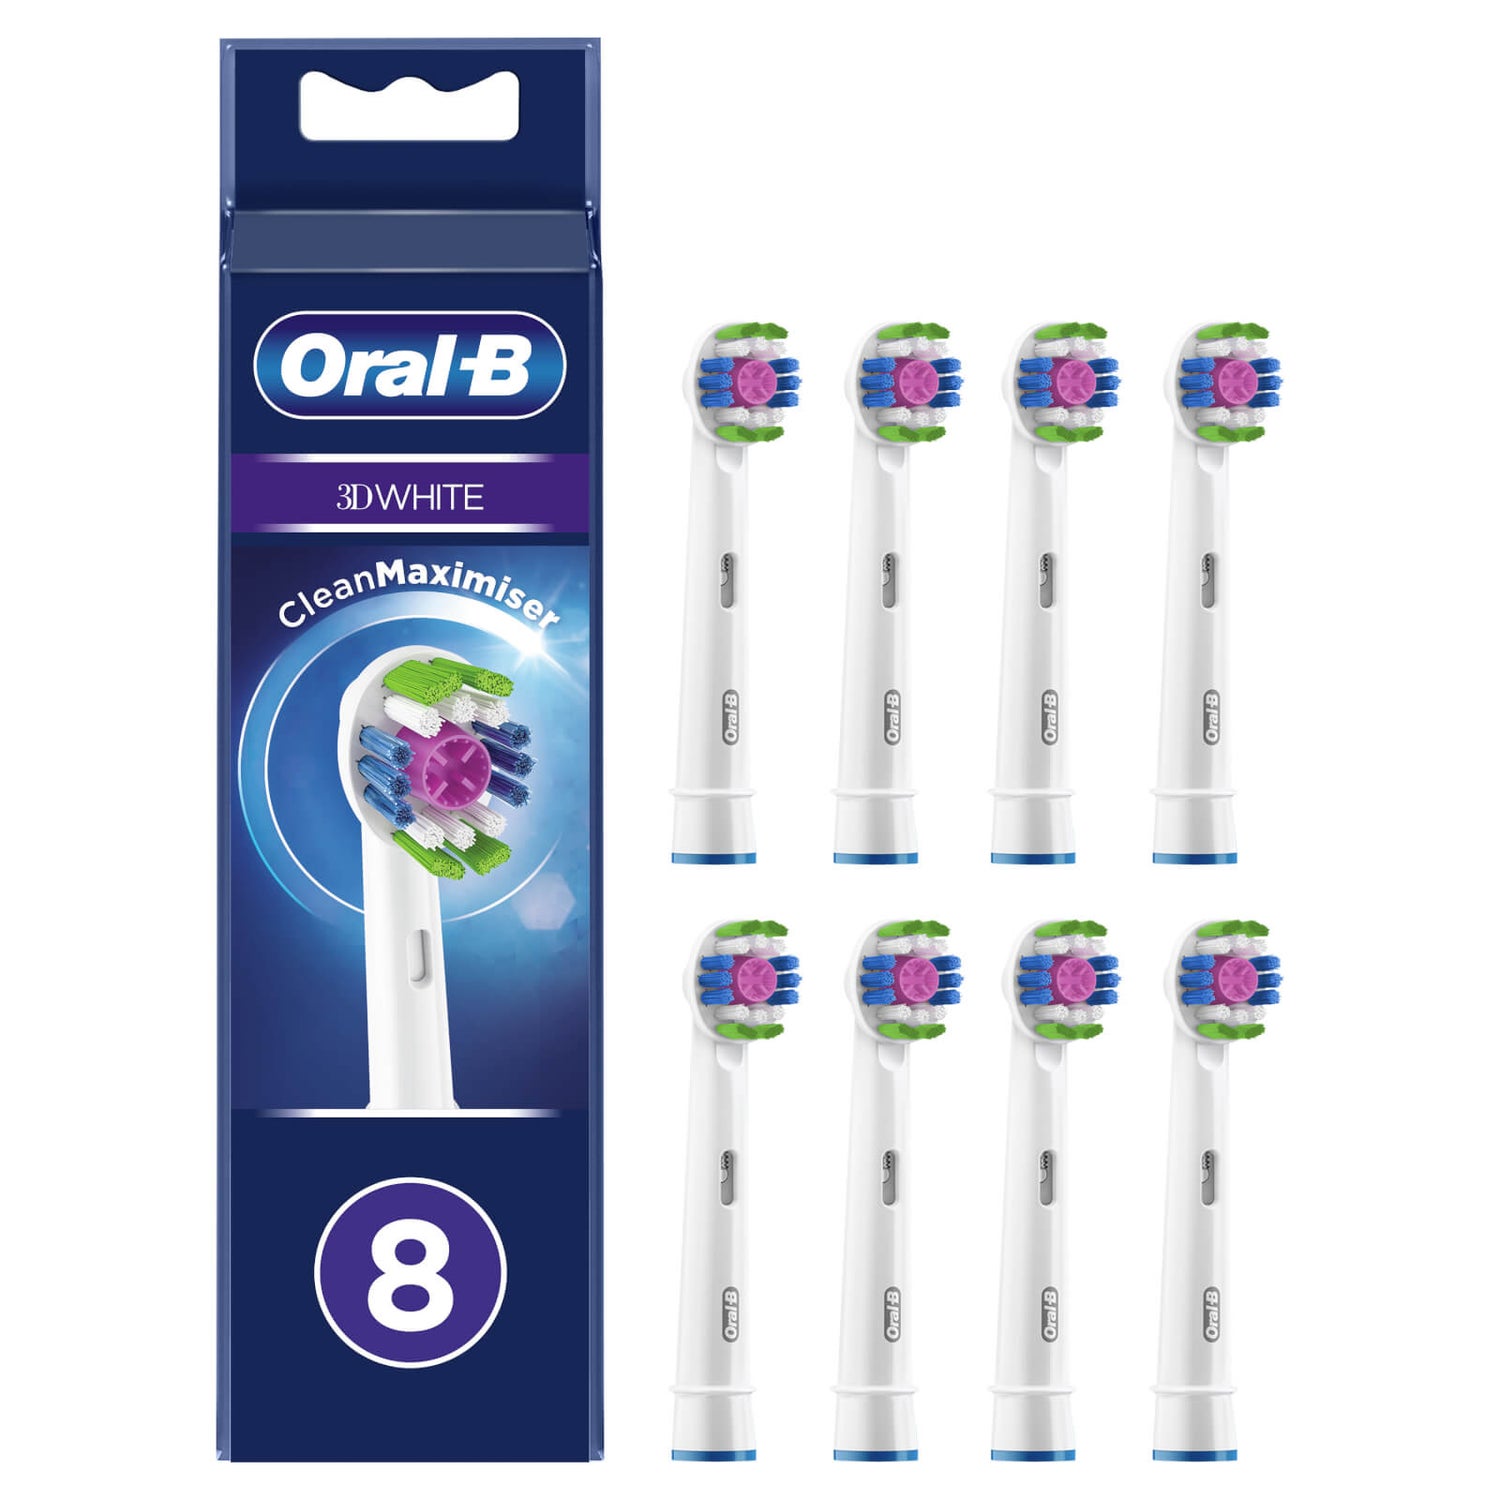 Oral-B 3D White Toothbrush Head with CleanMaximiser Technology, Pack of 8 Counts